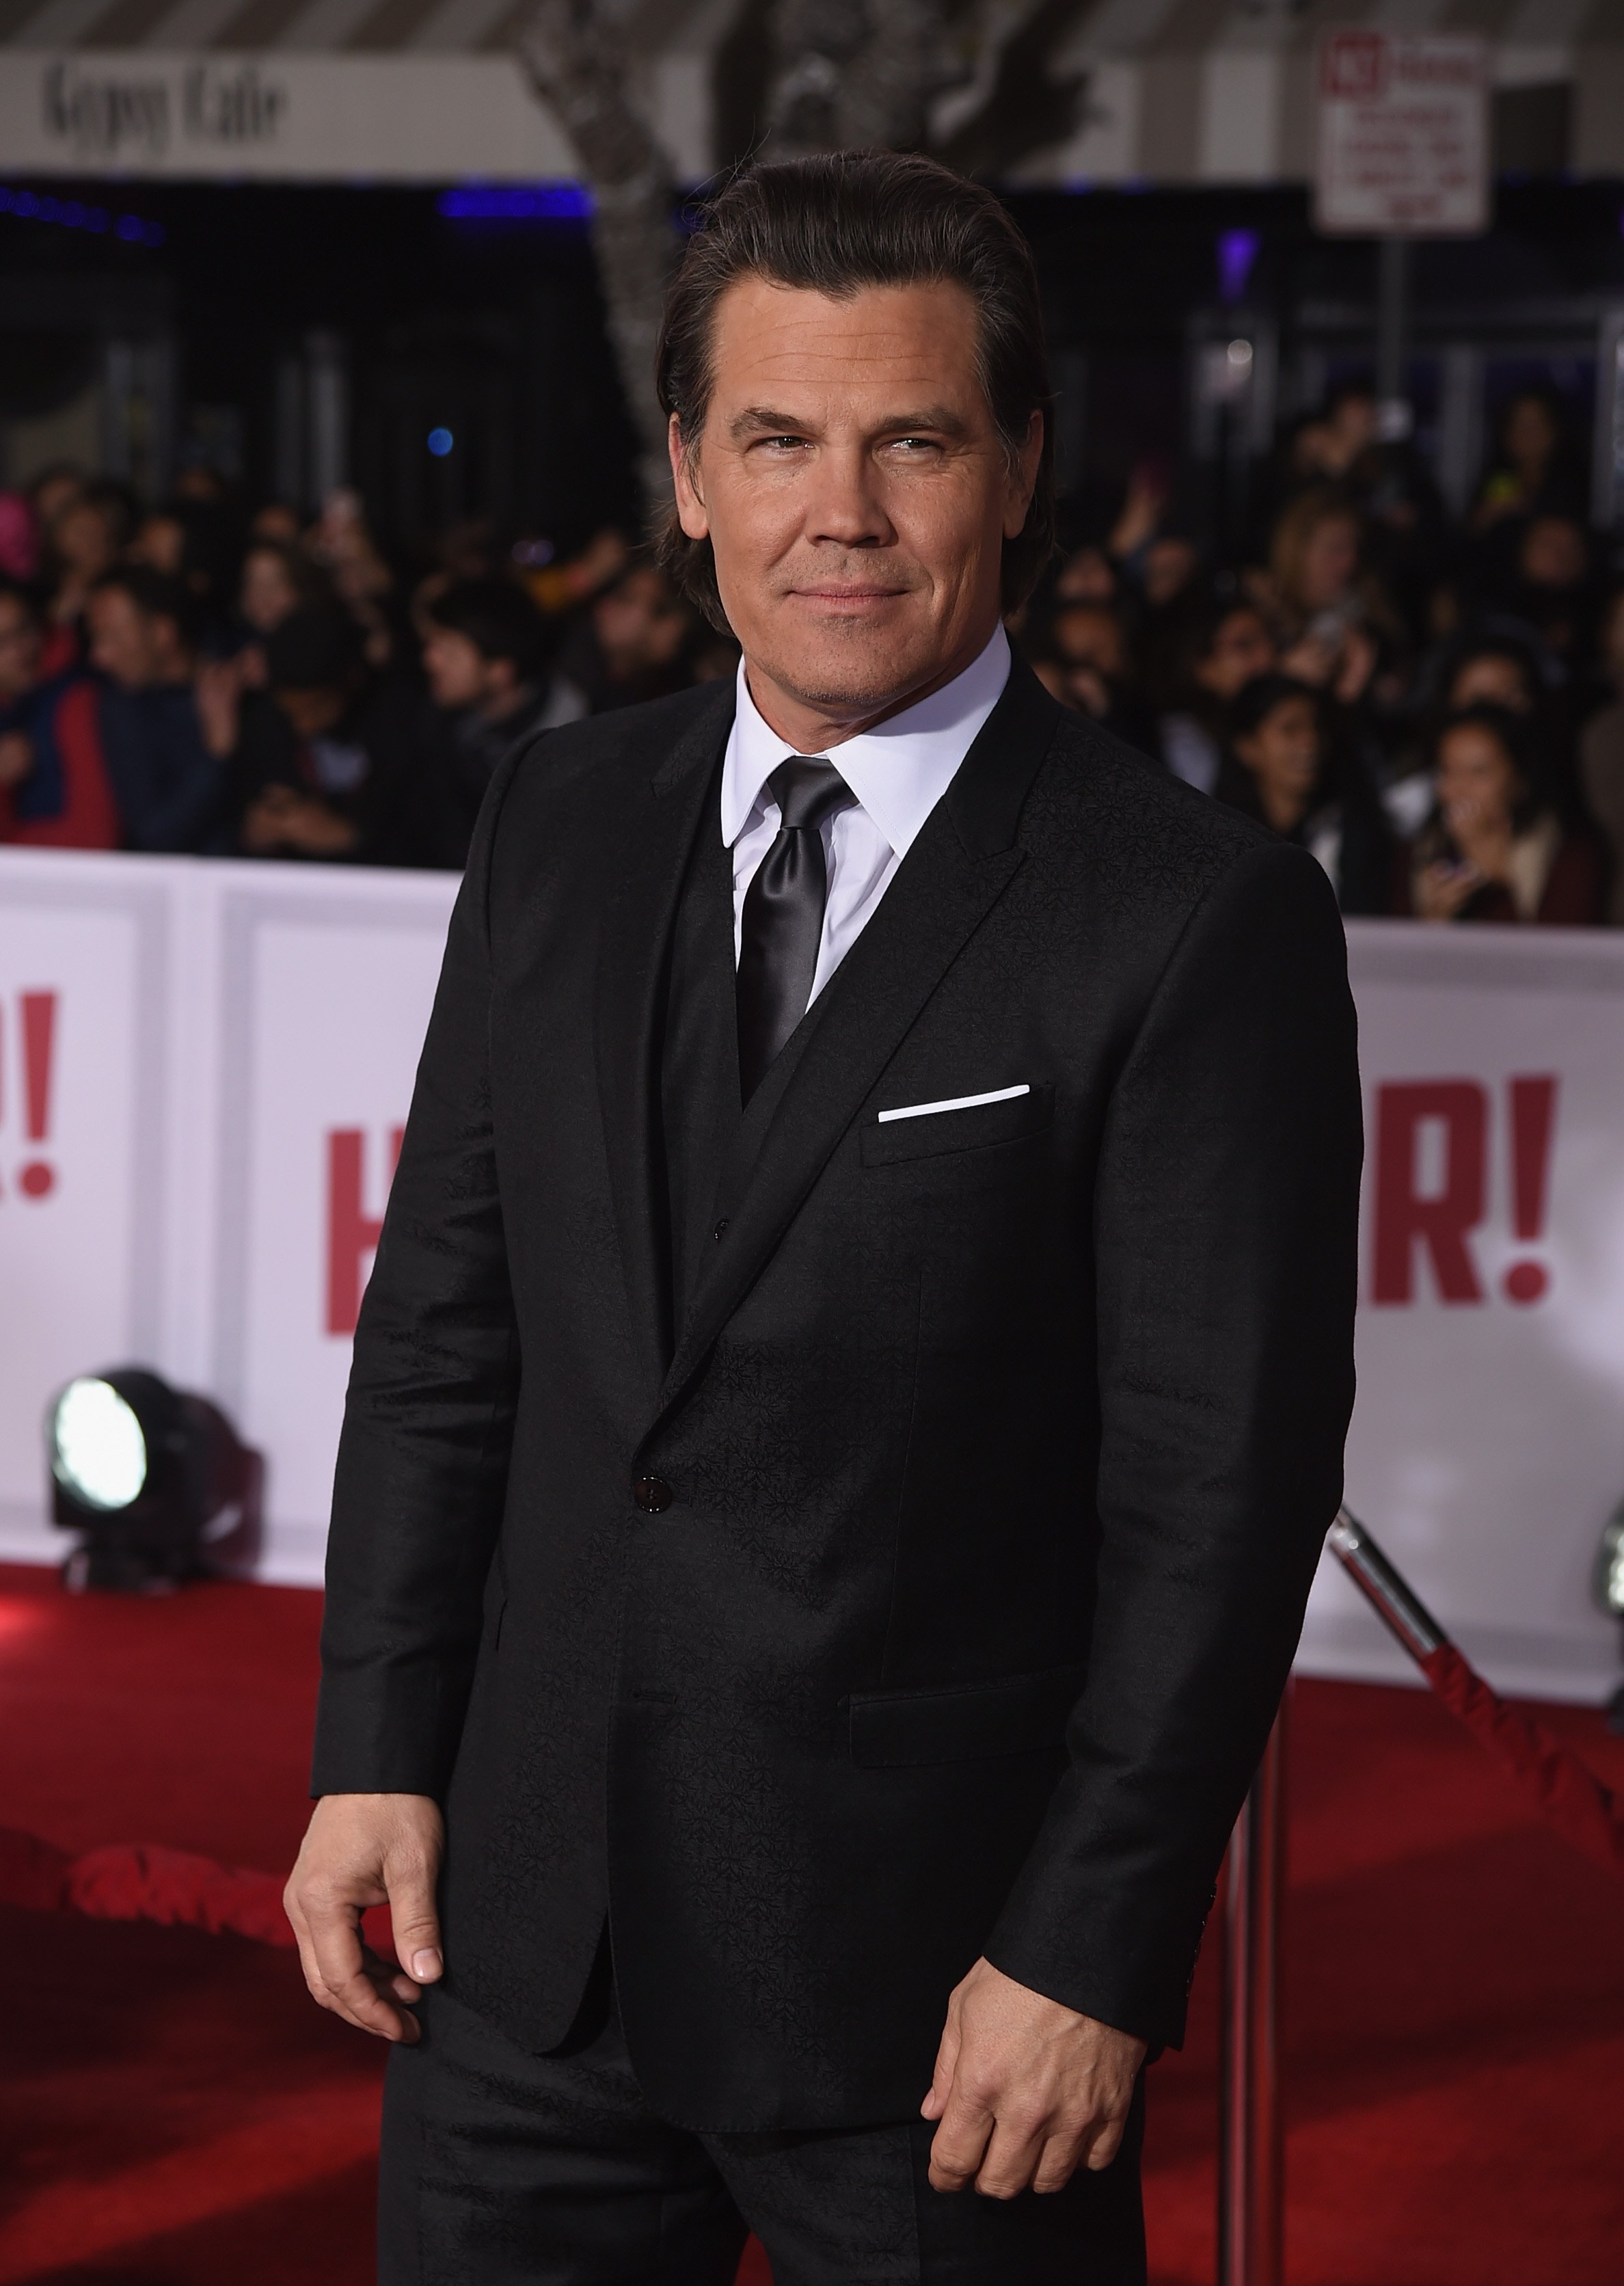 Josh Brolin attends Universal Pictures' 'Hail, Caesar!' premiere at Regency Village Theatre on February 1, 2016 in Westwood